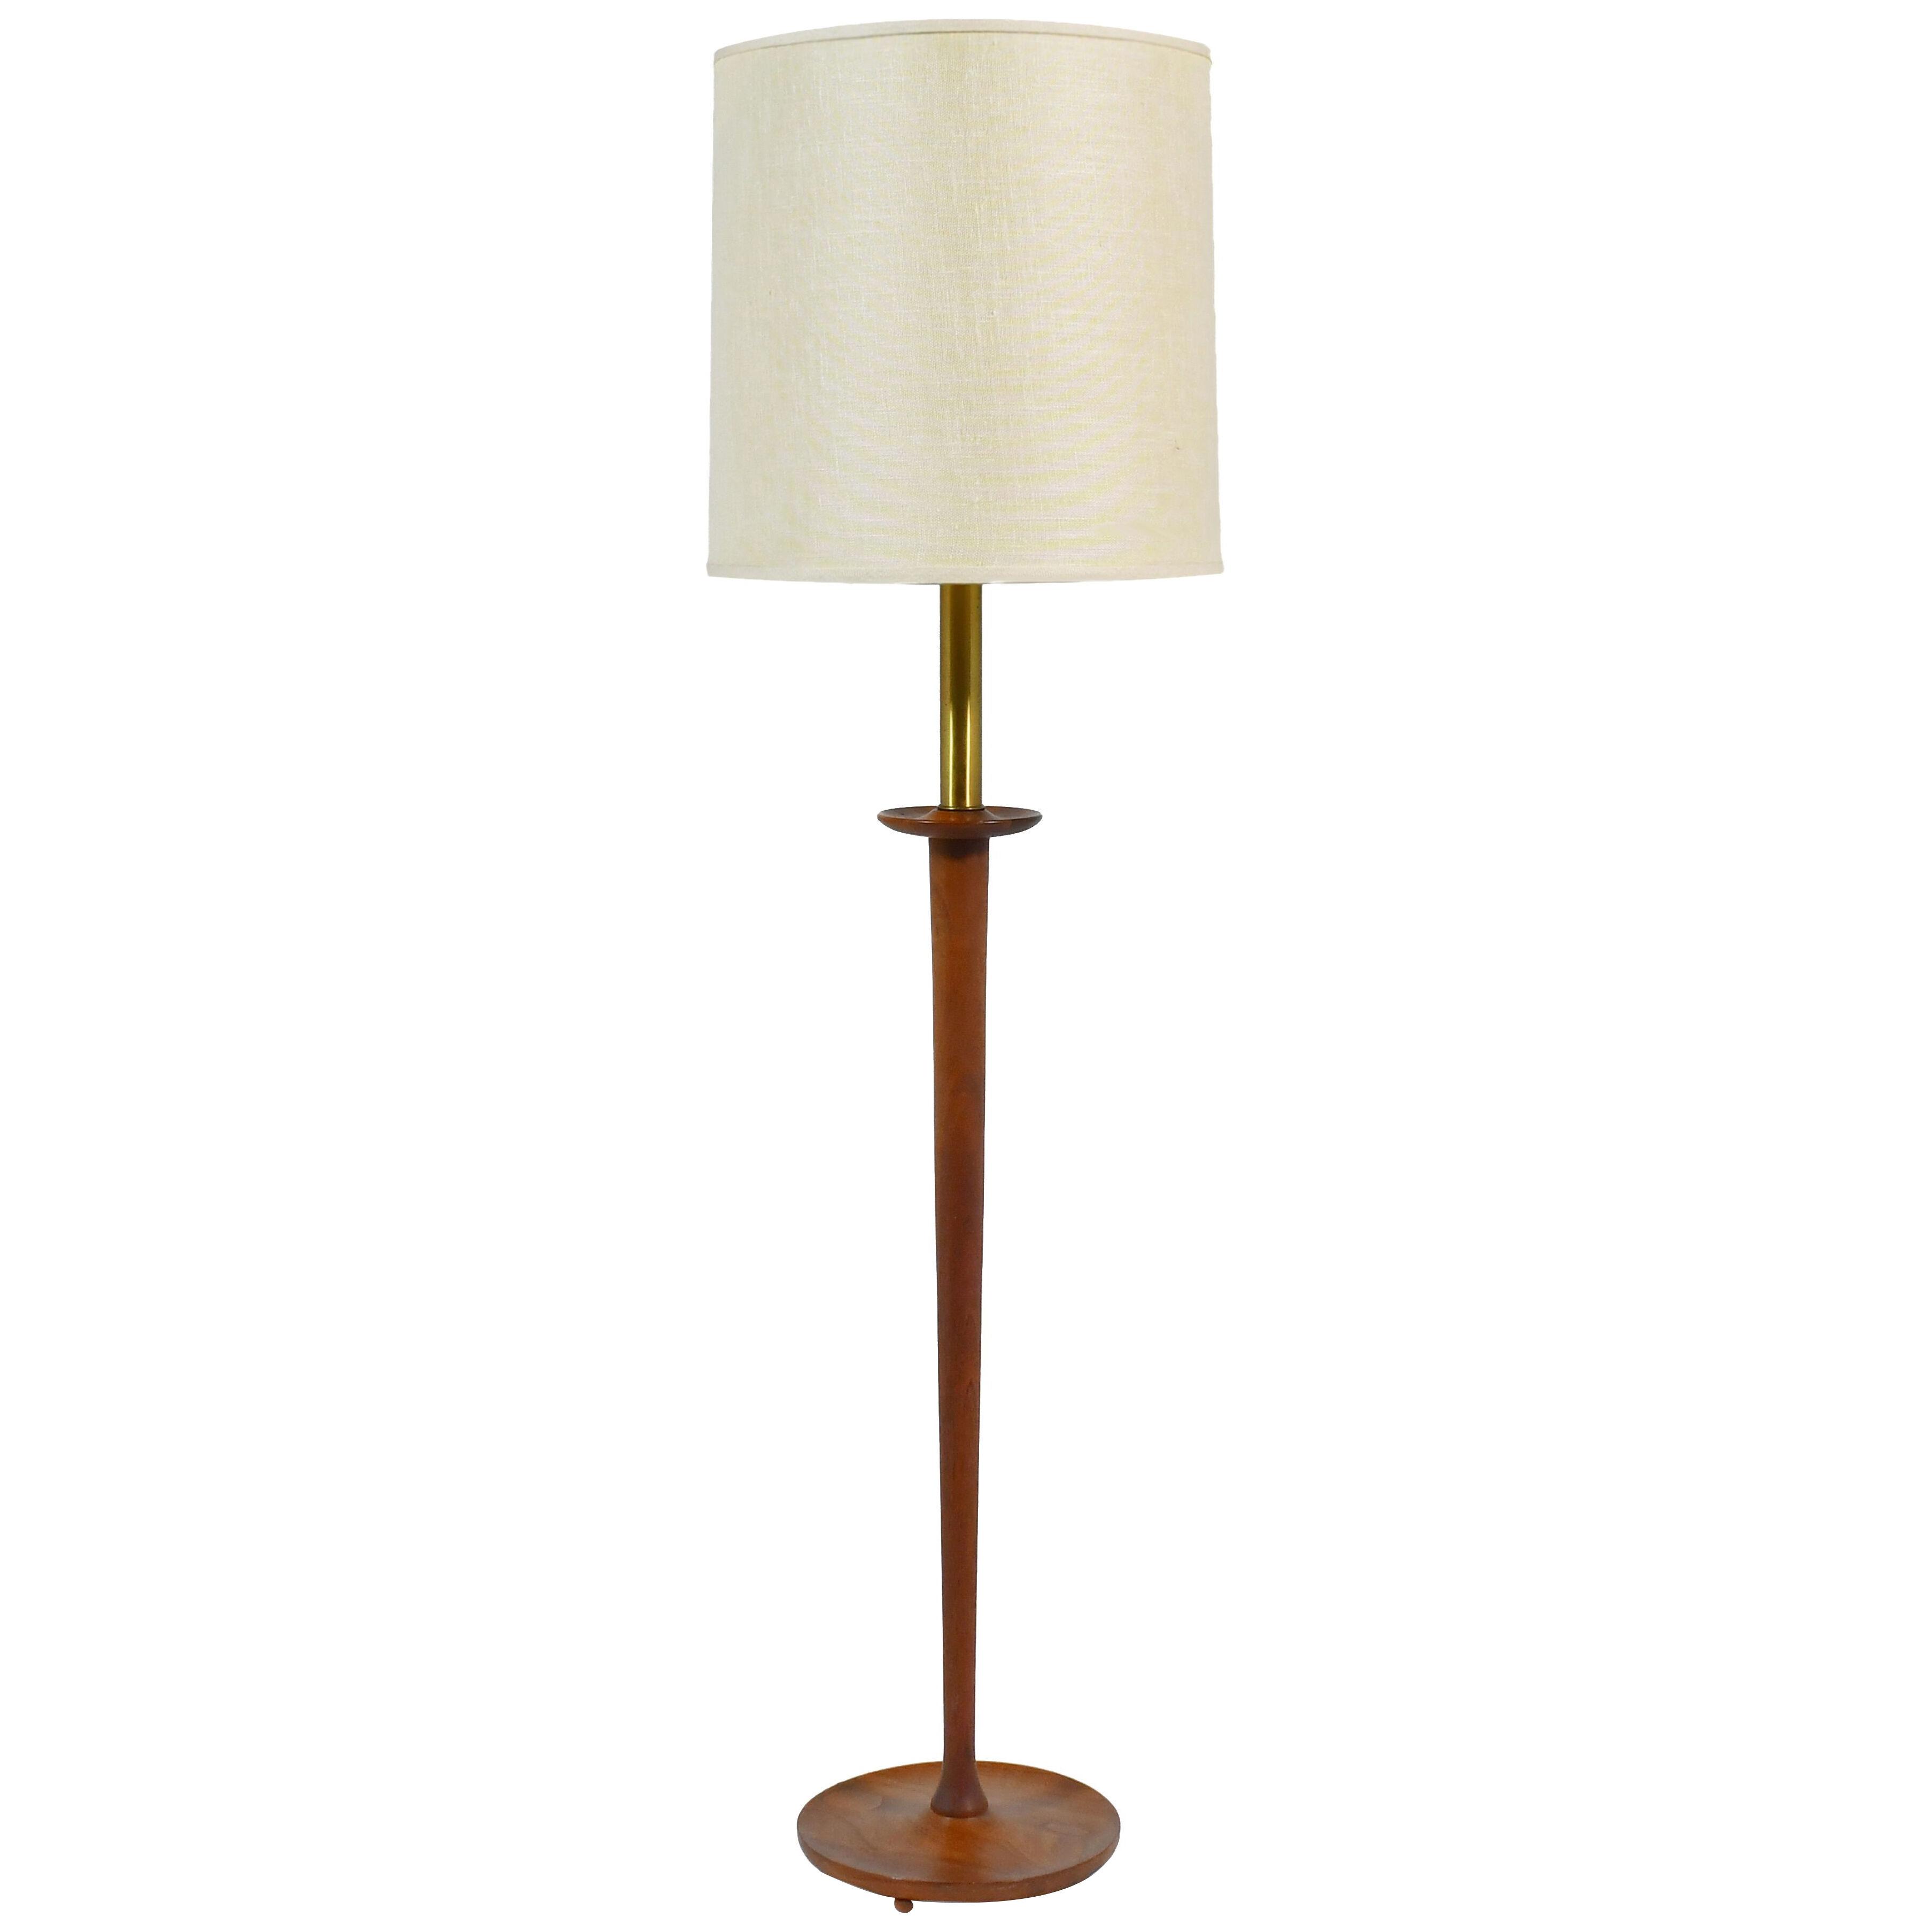 Midcentury Walnut Floor Lamp with Sculpted Details